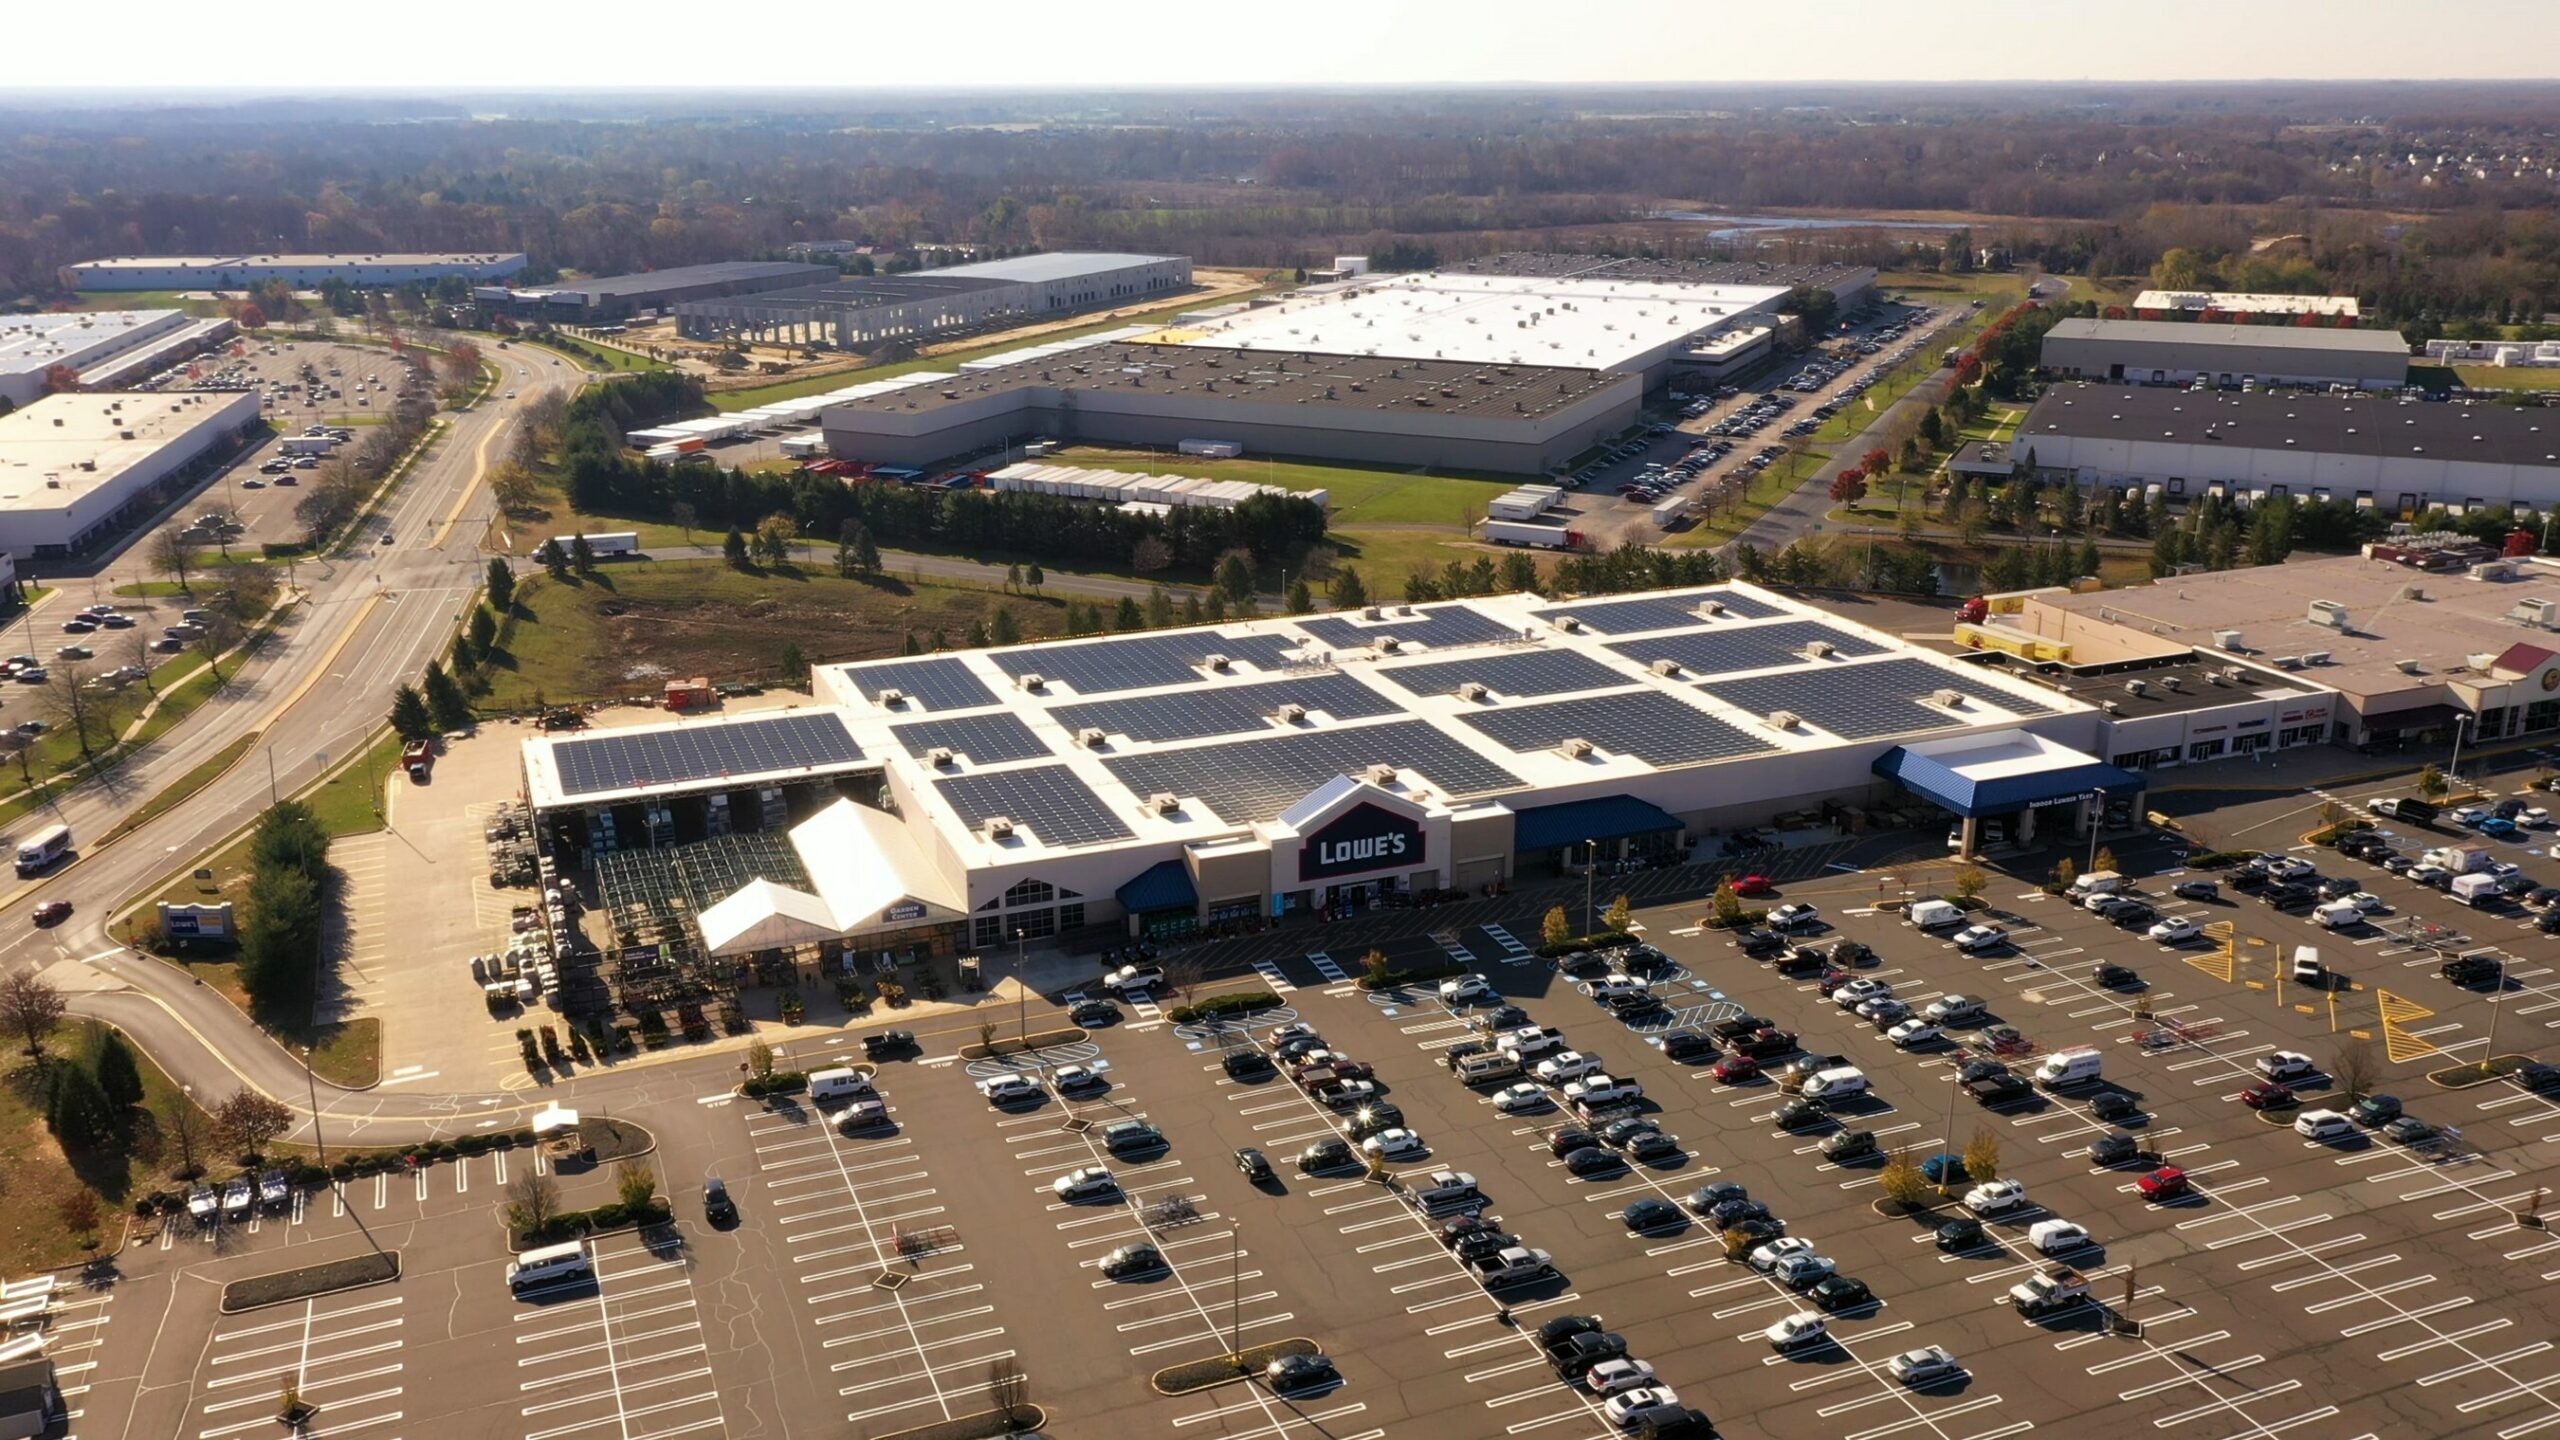 Rooftop solar panels installed at the Lowe's in Lumberton, NJ.